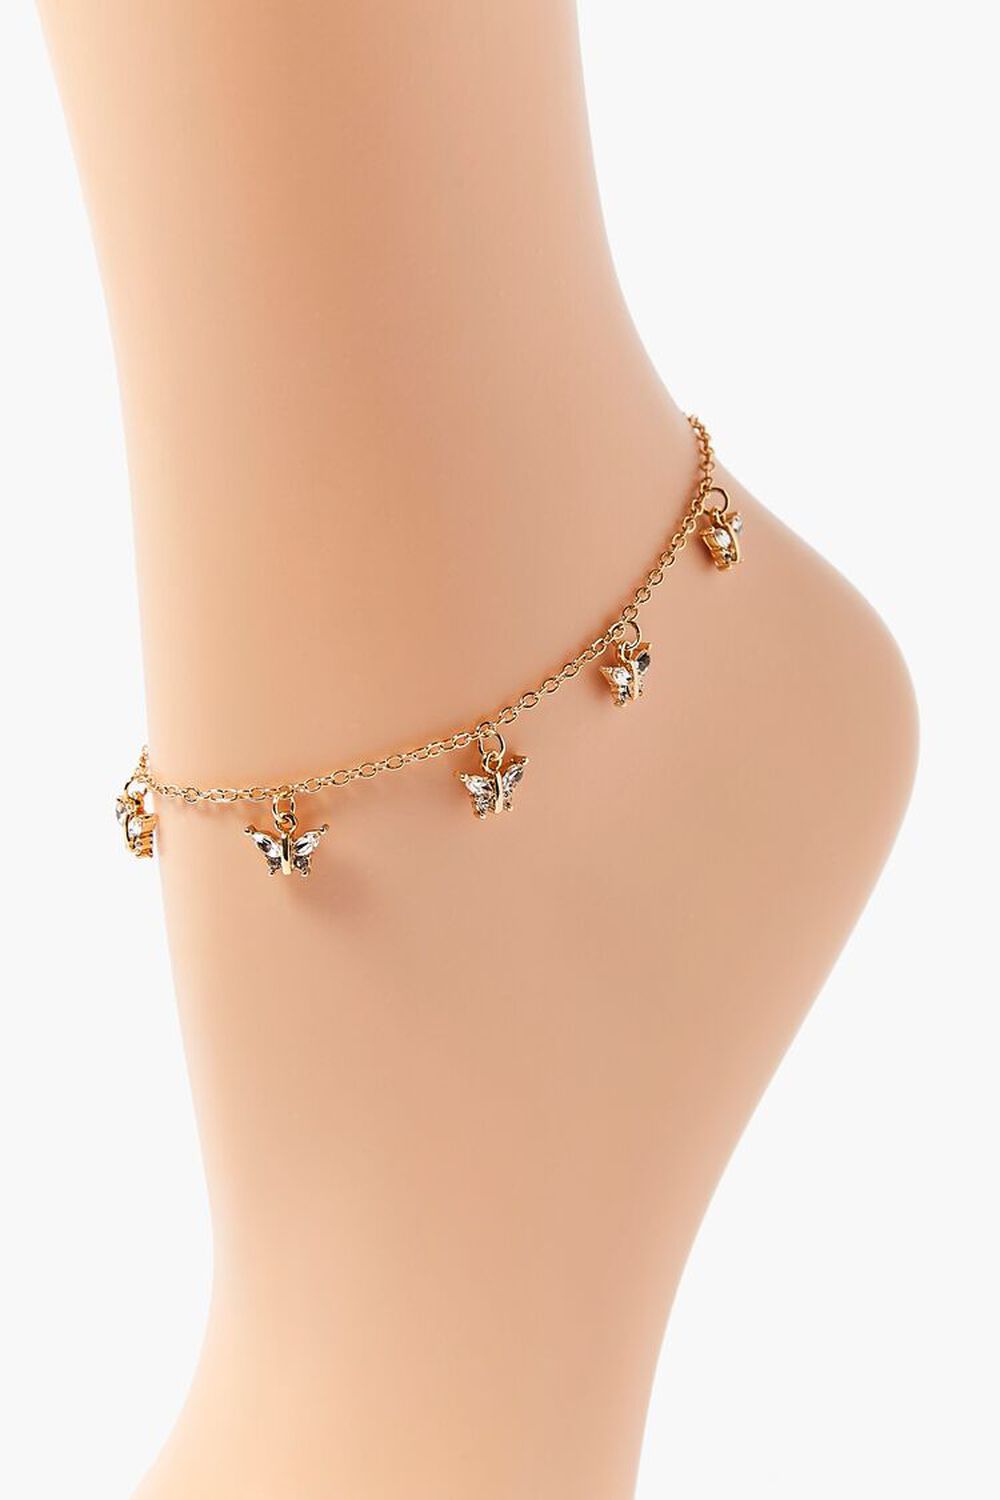 Rhinestone Butterfly Charm Anklet, image 2